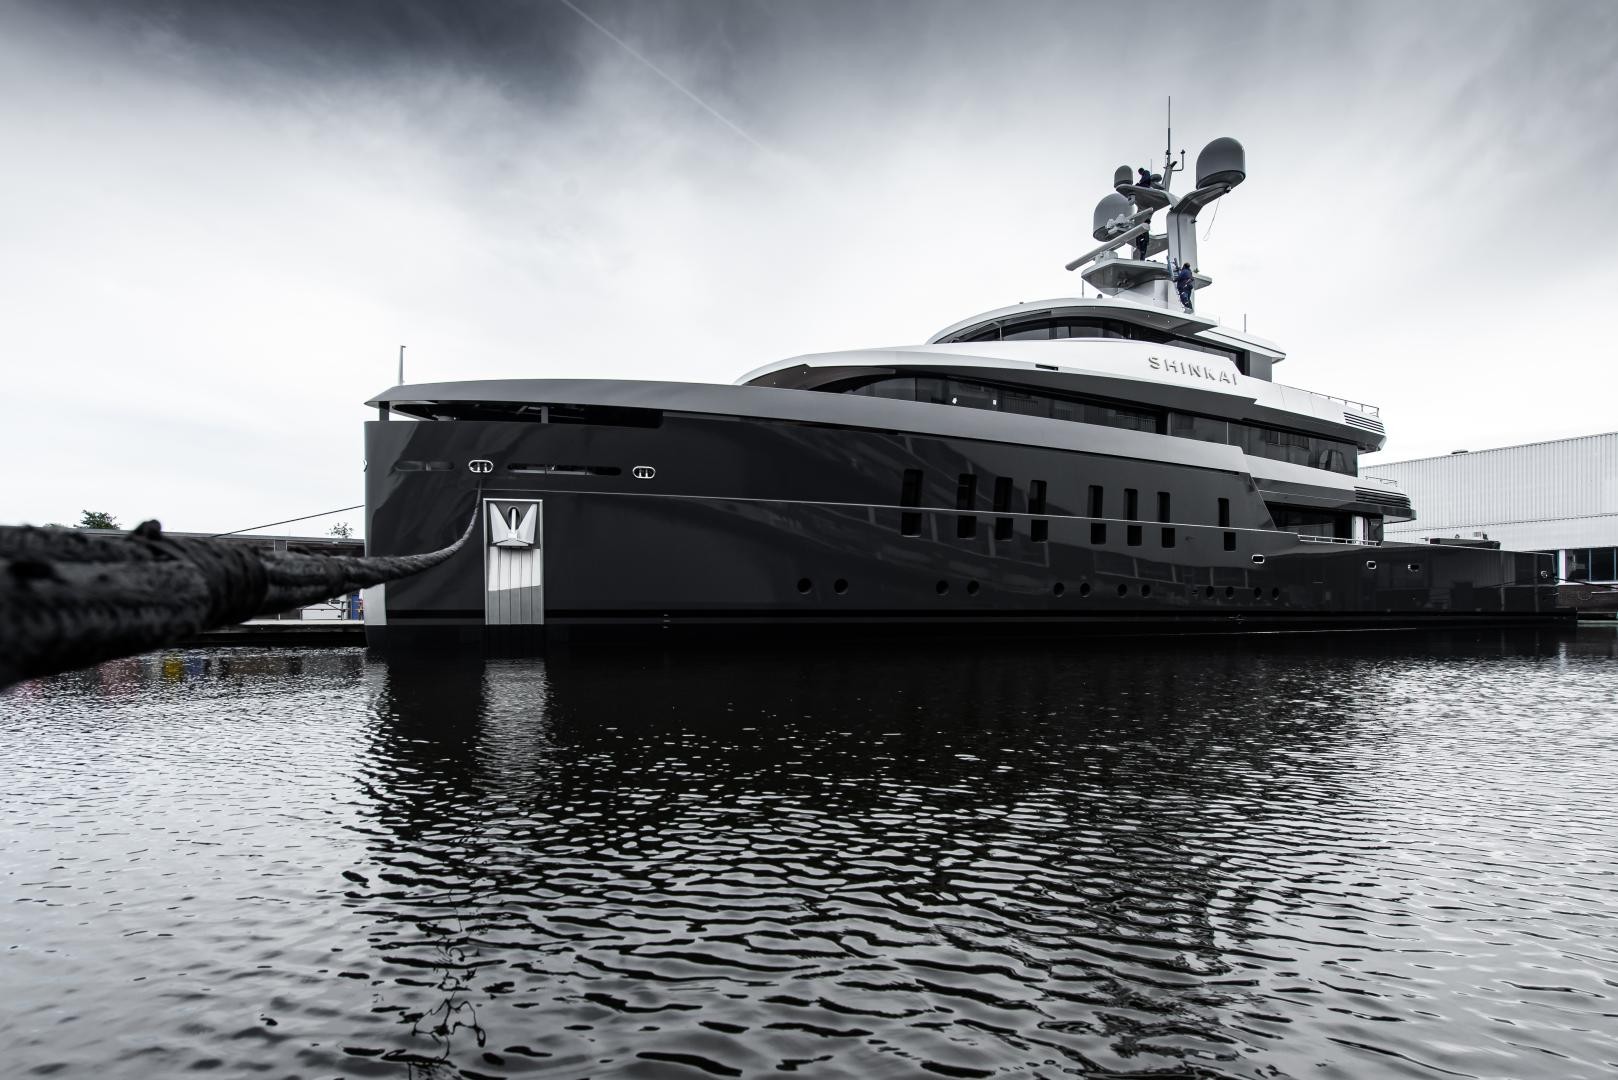 Philippe Briand’s no compromise onboard the 55m Feadship Shinkai